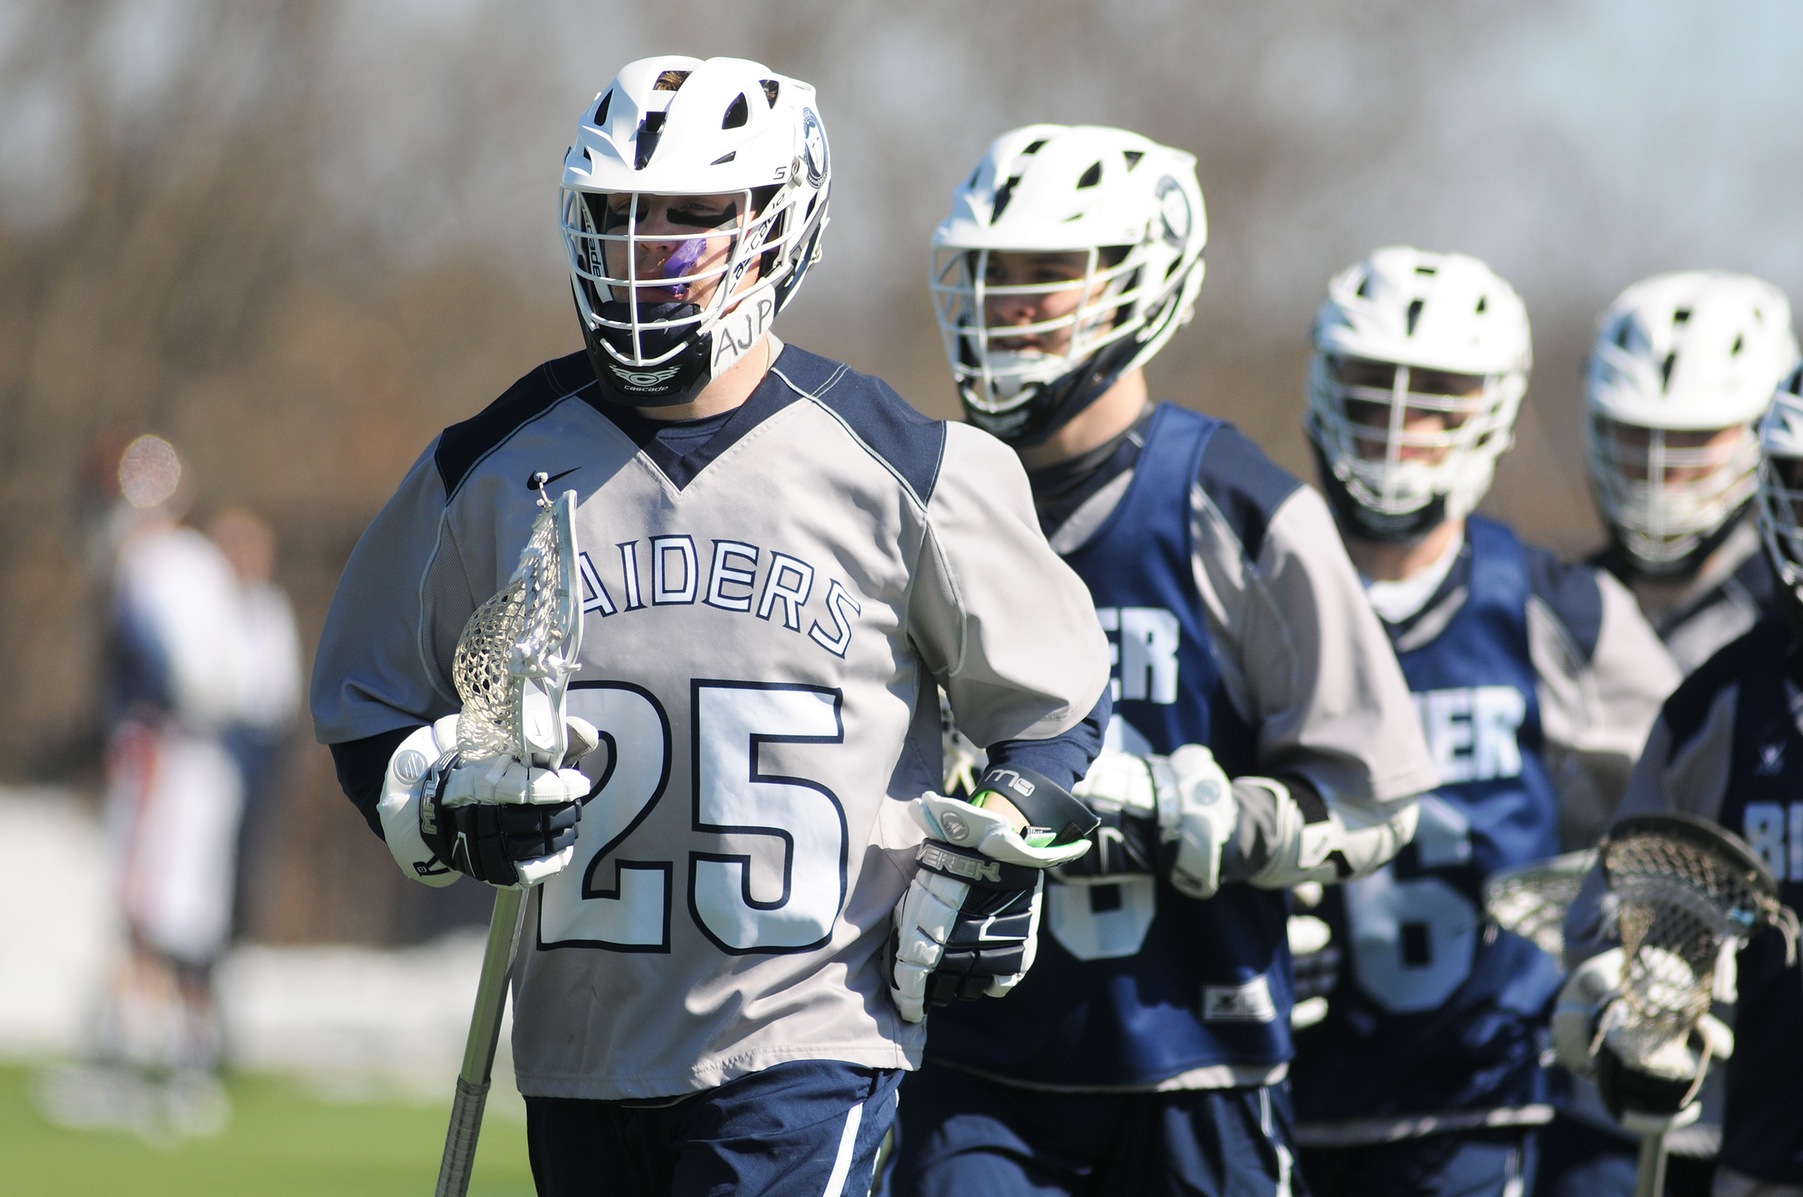 Men's Lacrosse: Raiders capture first conference win at home against AMCats, 11-9.